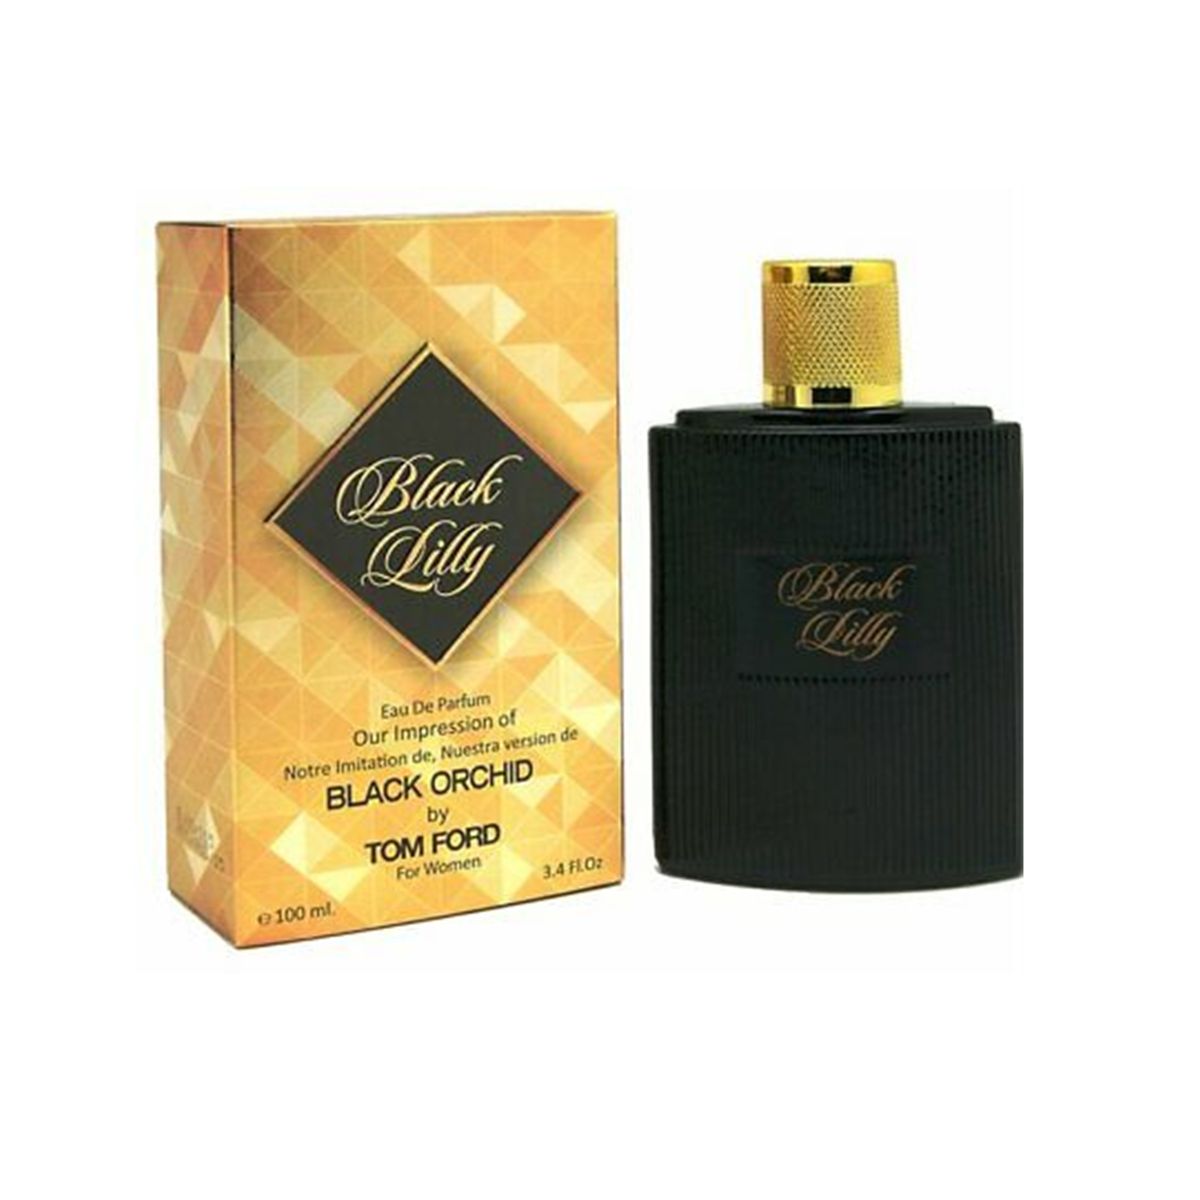 Black Lilly - Black Orchid by Tom Ford, For Women, Alternative ...